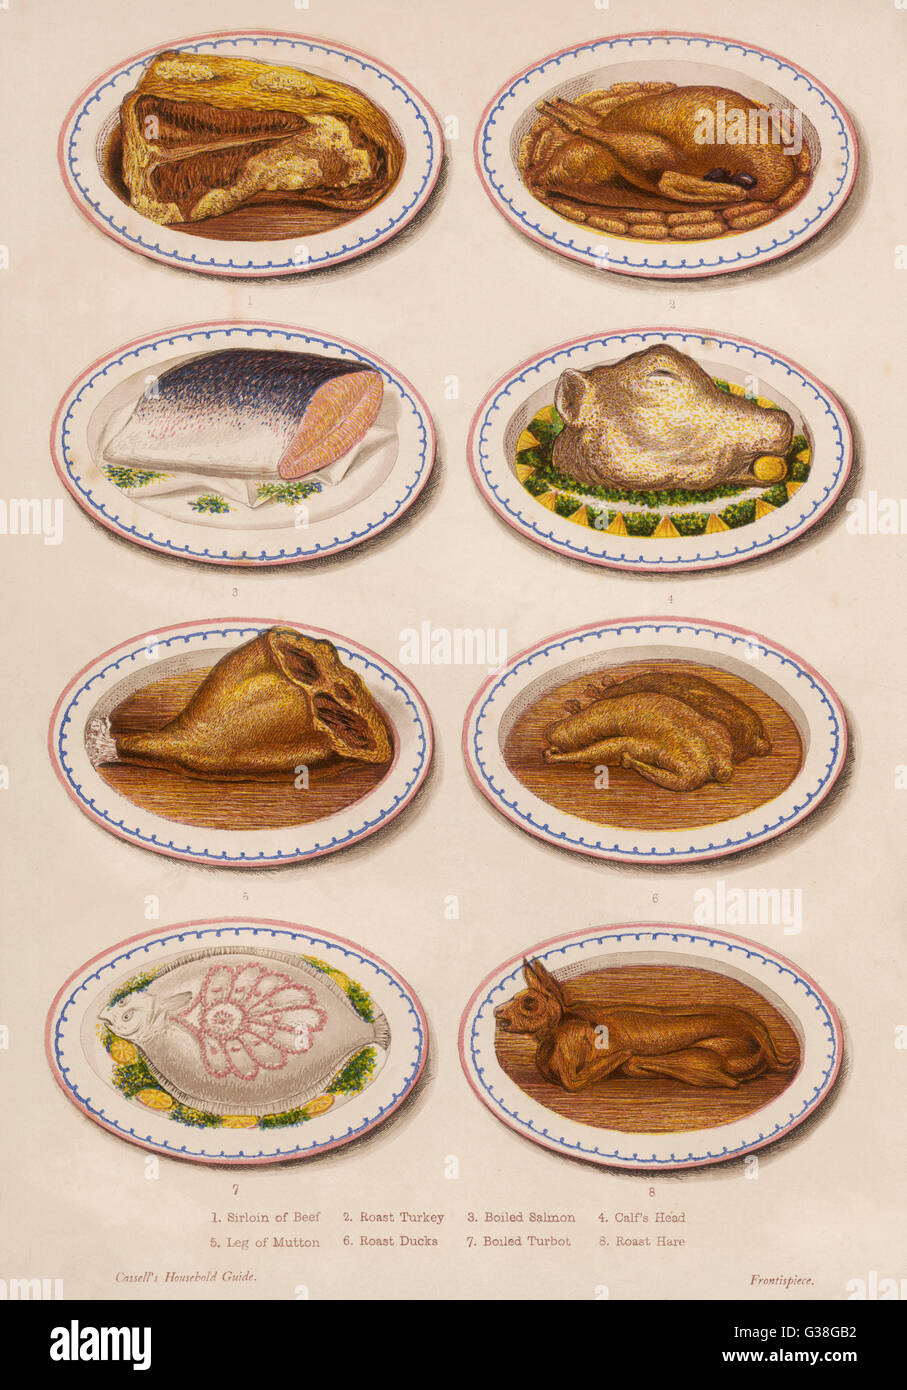 MEAT AND FISH DISHES Stock Photo